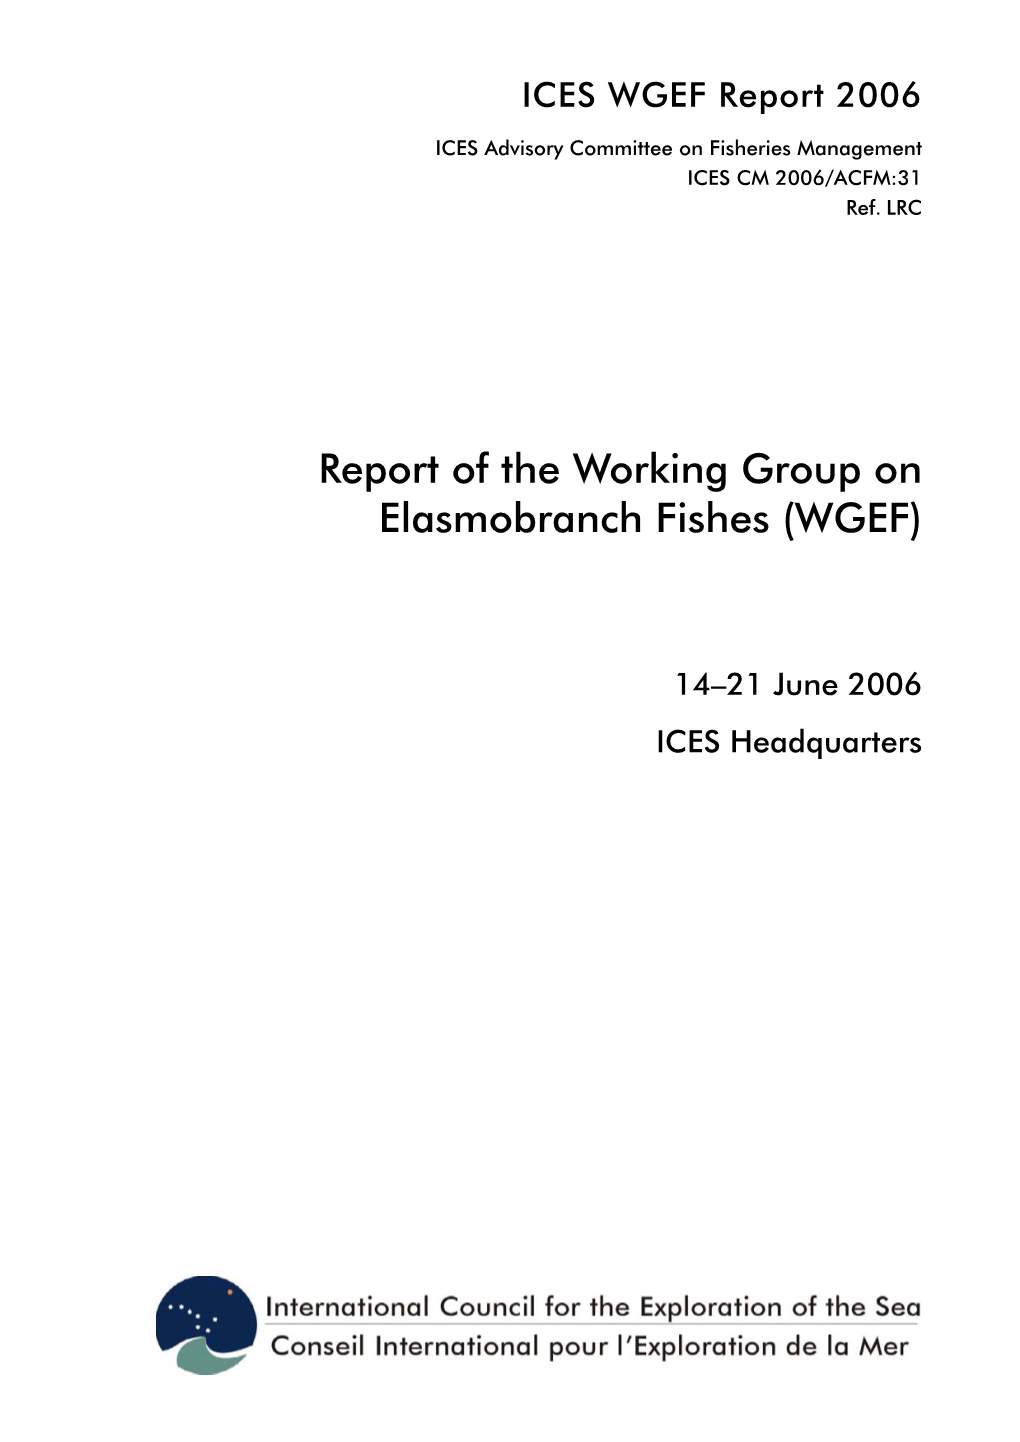 Report of the Working Group Onelasmobranch Fishes (WGEF). ICES CM 2006/ACFM:31